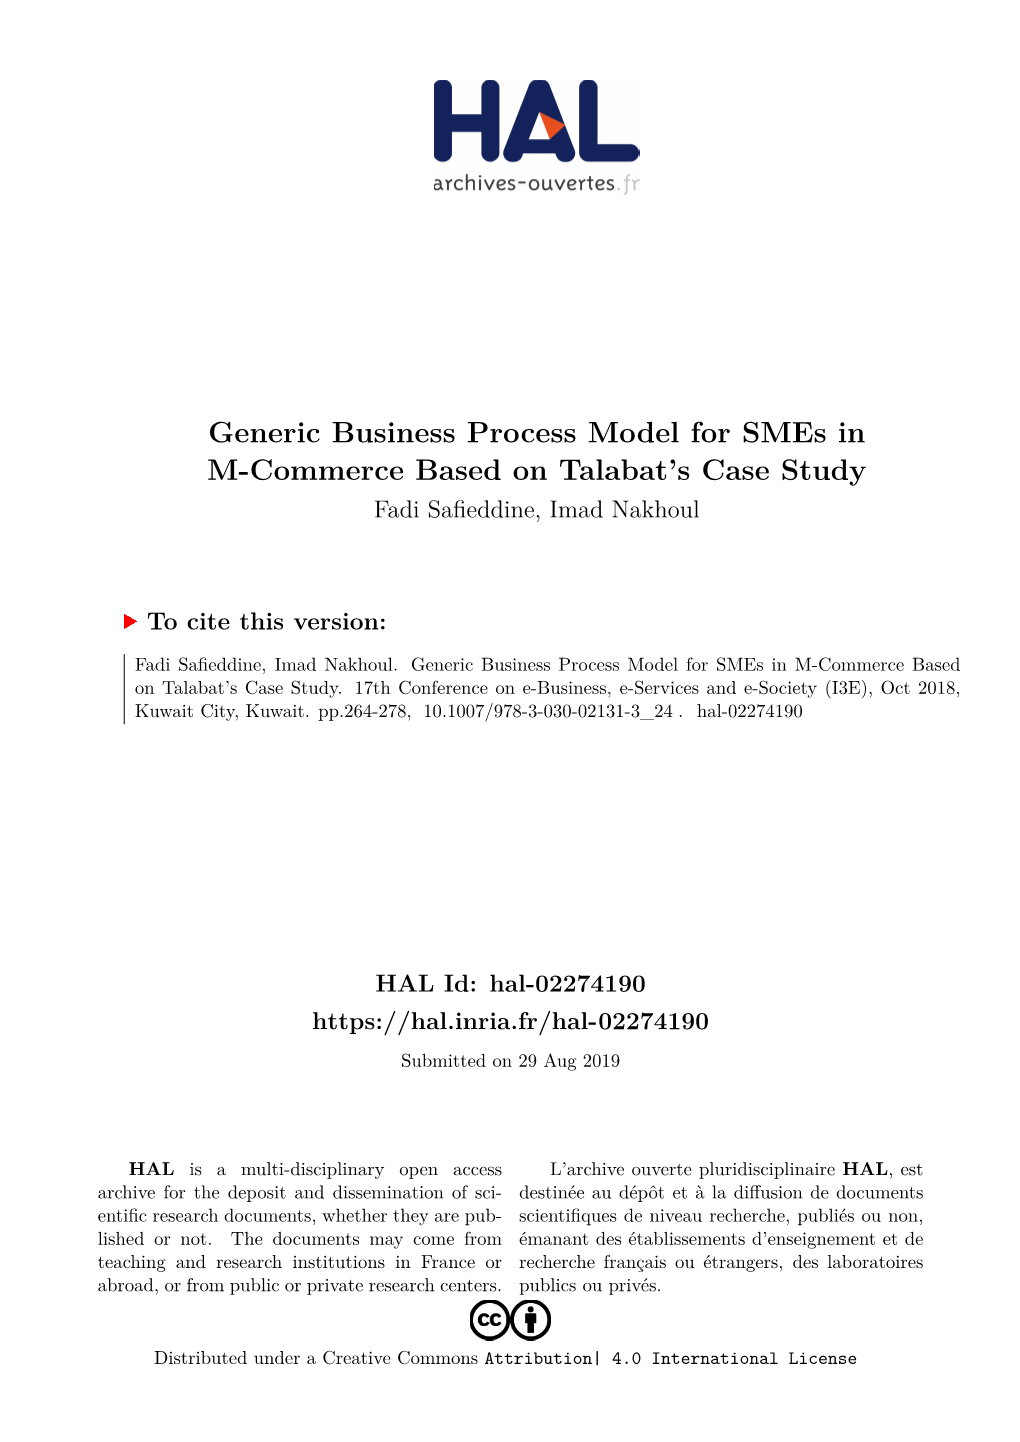 Generic Business Process Model for Smes in M-Commerce Based on Talabat’S Case Study Fadi Safieddine, Imad Nakhoul